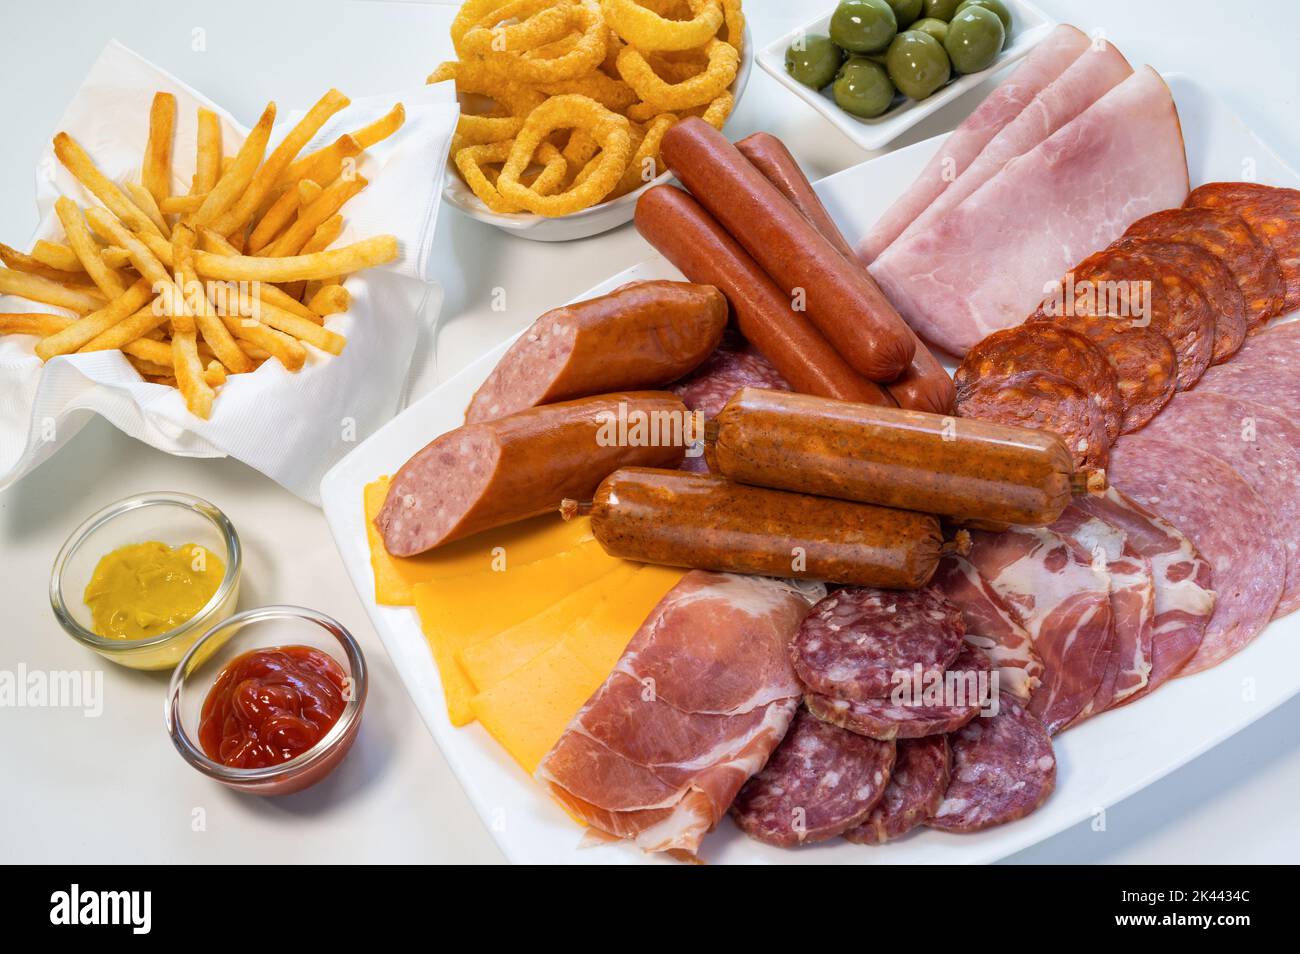 Assorted unhealthy processed and fried foods on table Stock Photo